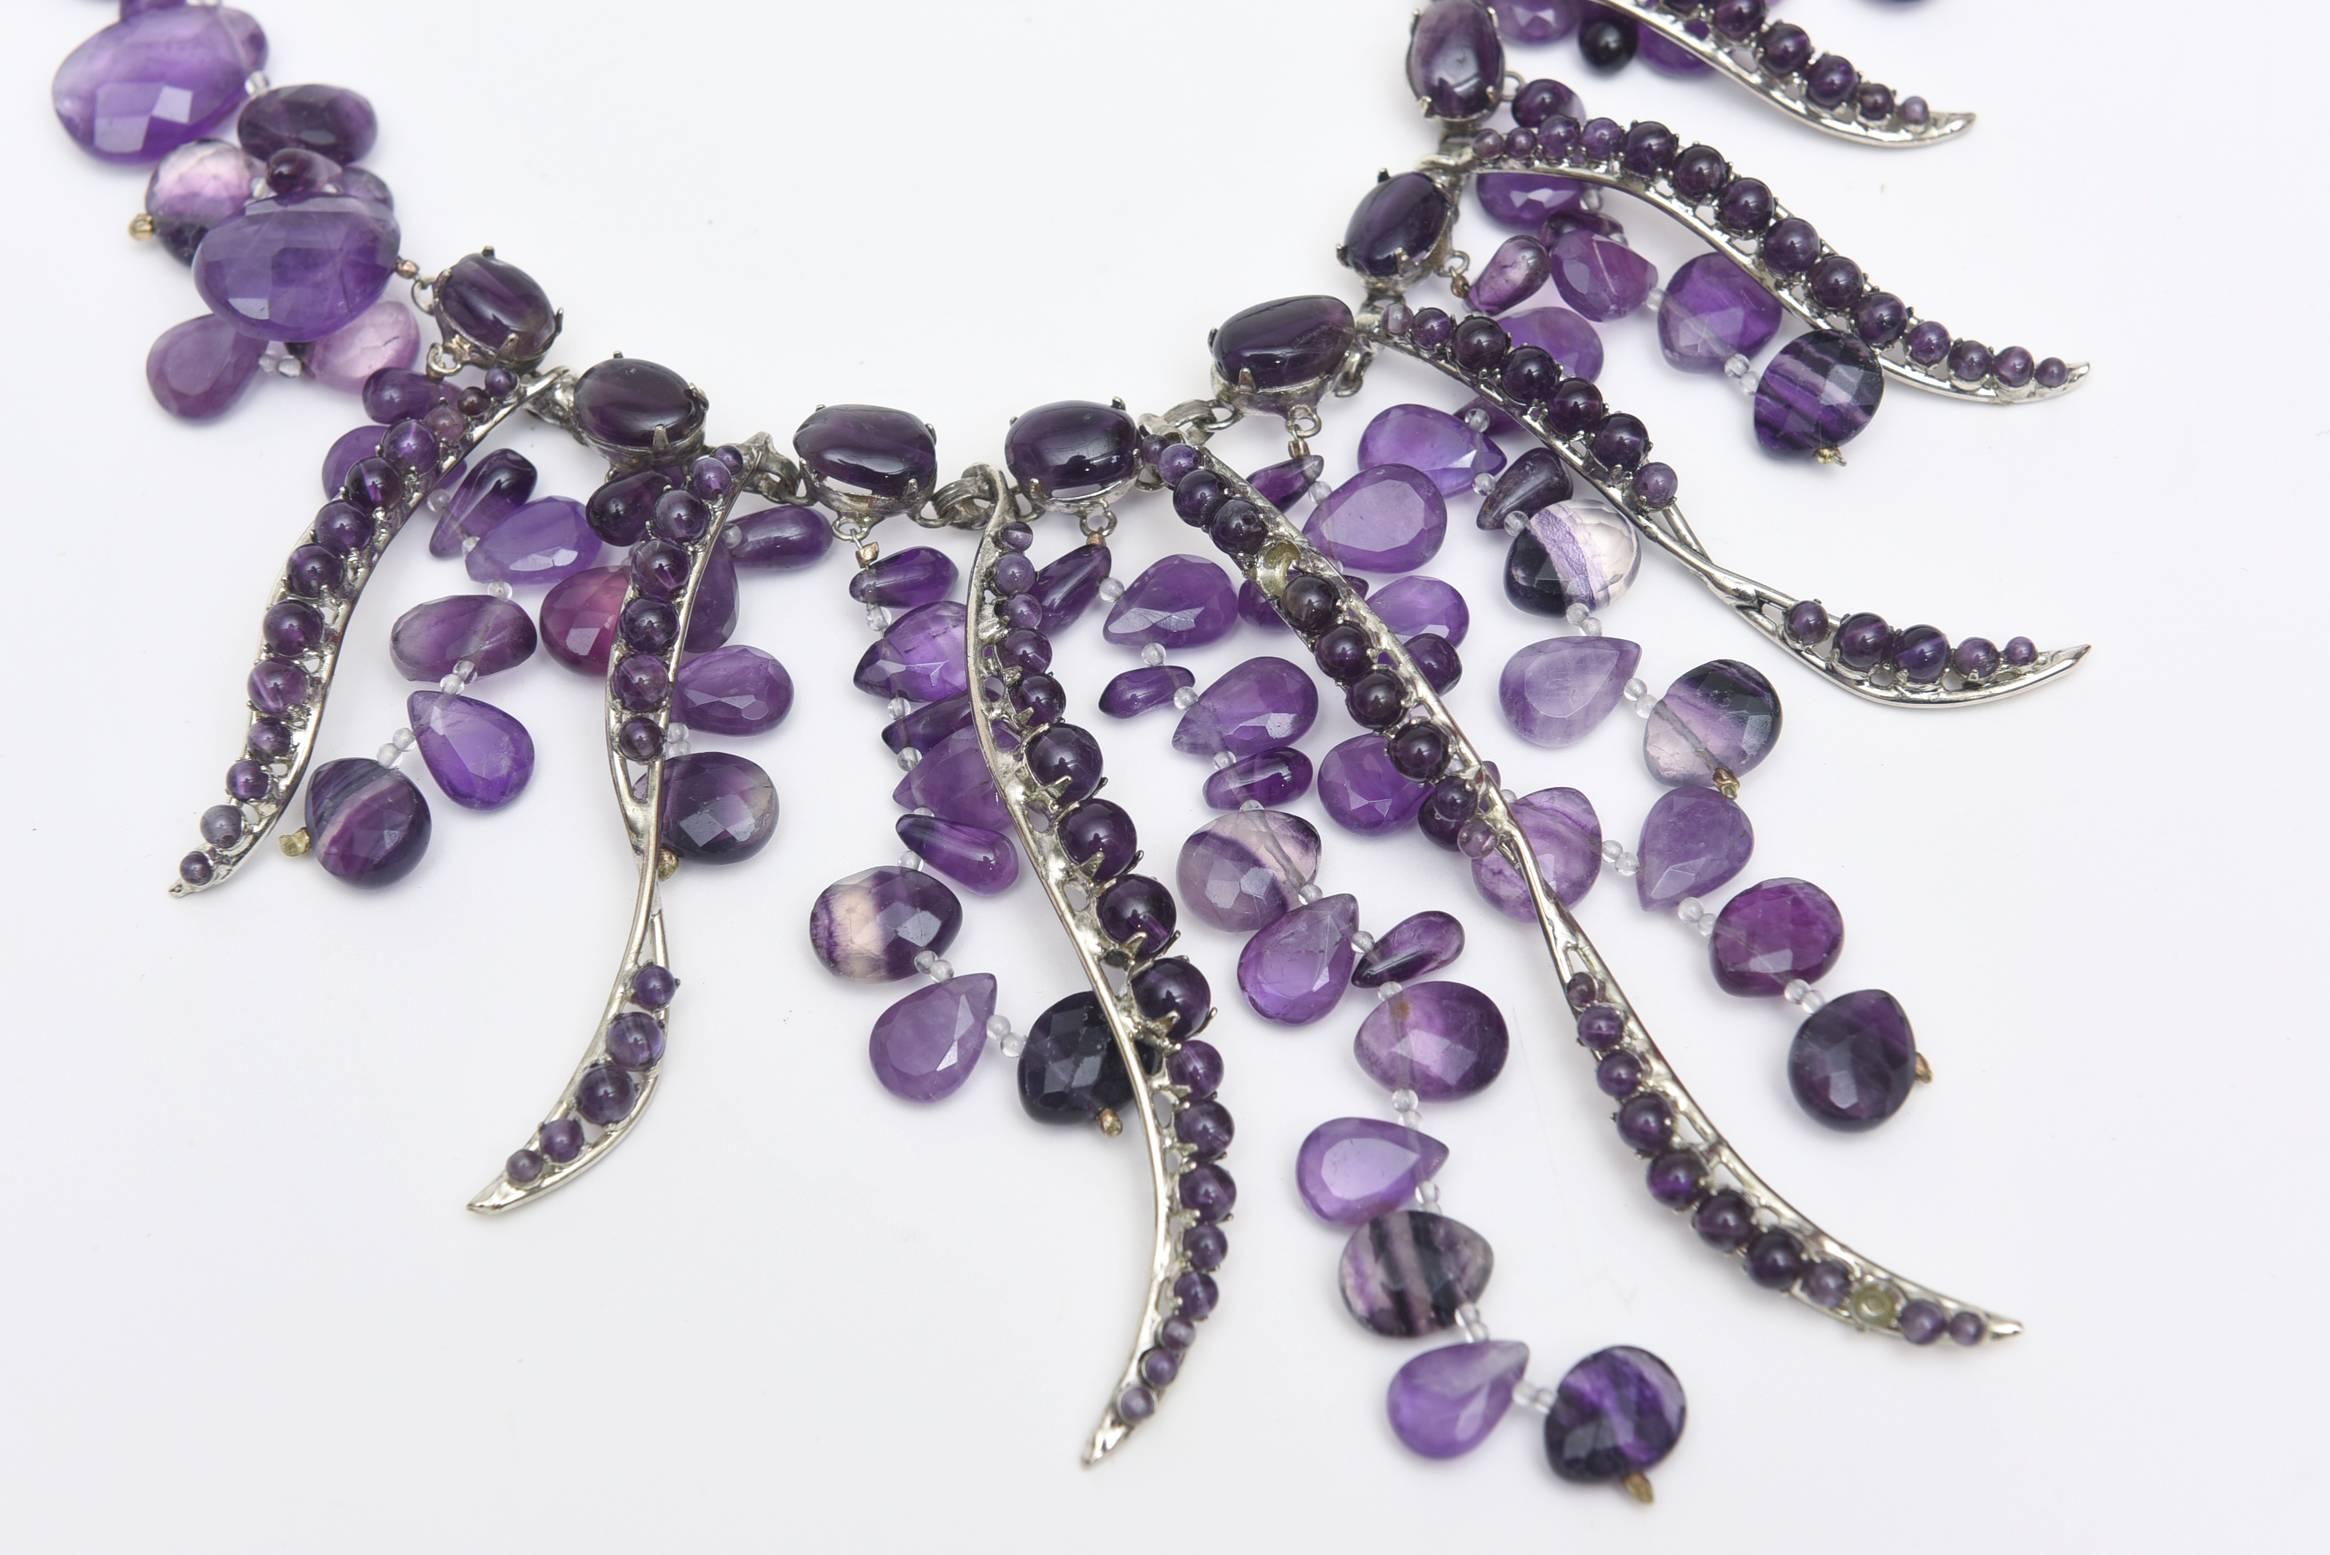 This dramatic and theatrical cascading amethyst and silver bib necklace looks stunning on. It is signed by Siman Tu. His work is in the category of jewelry designer Iranj Monji. SIman Tu is a NYC based well known semi precious stone jewelry designer